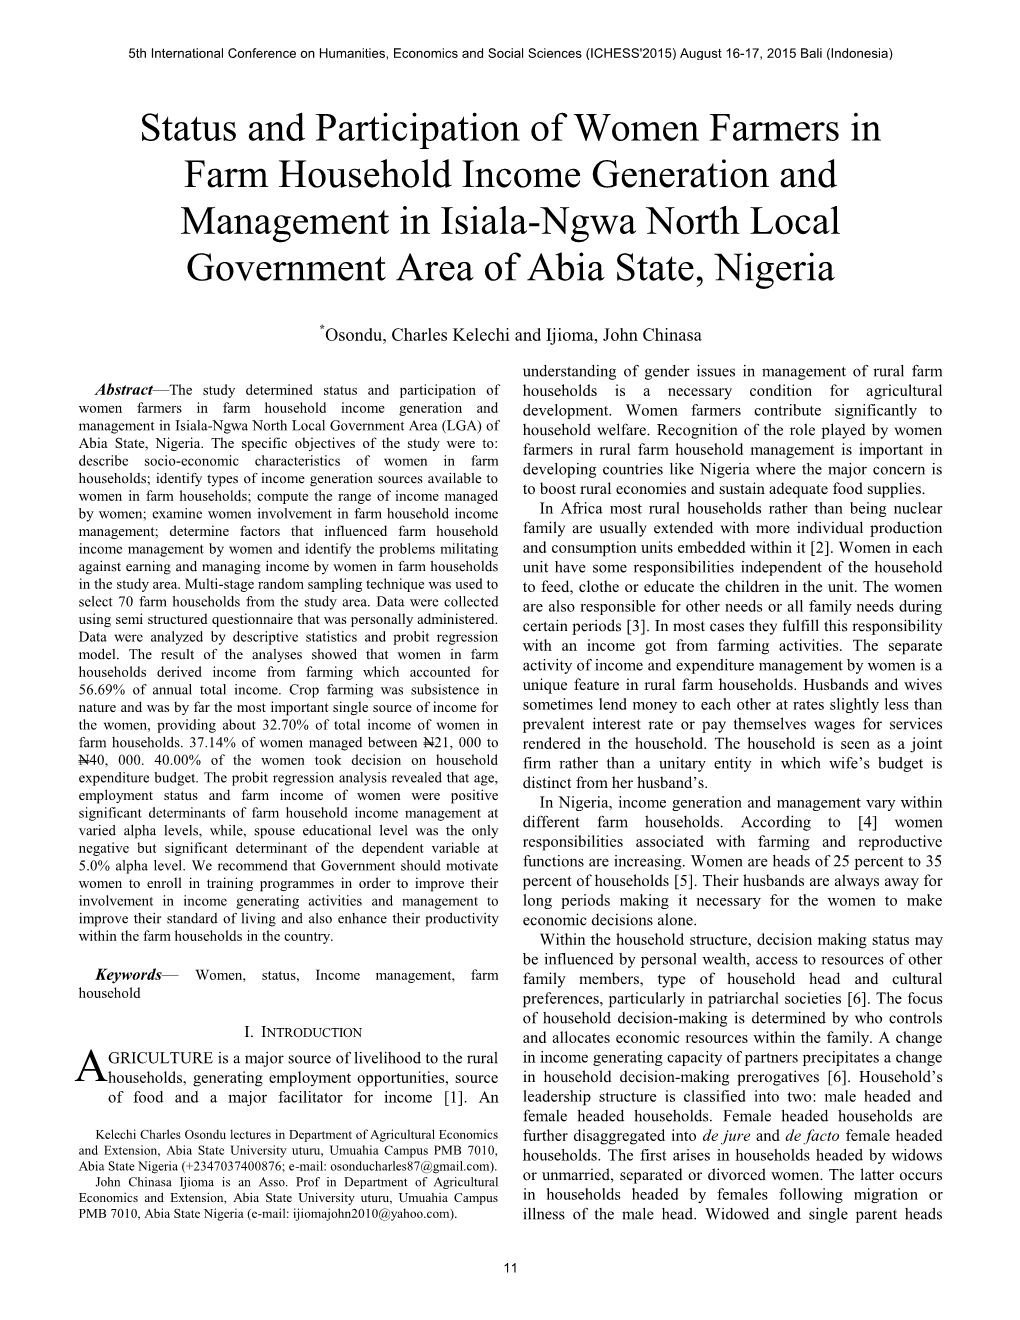 Status and Participation of Women Farmers in Farm Household Income Generation and Management in Isiala-Ngwa North Local Government Area of Abia State, Nigeria